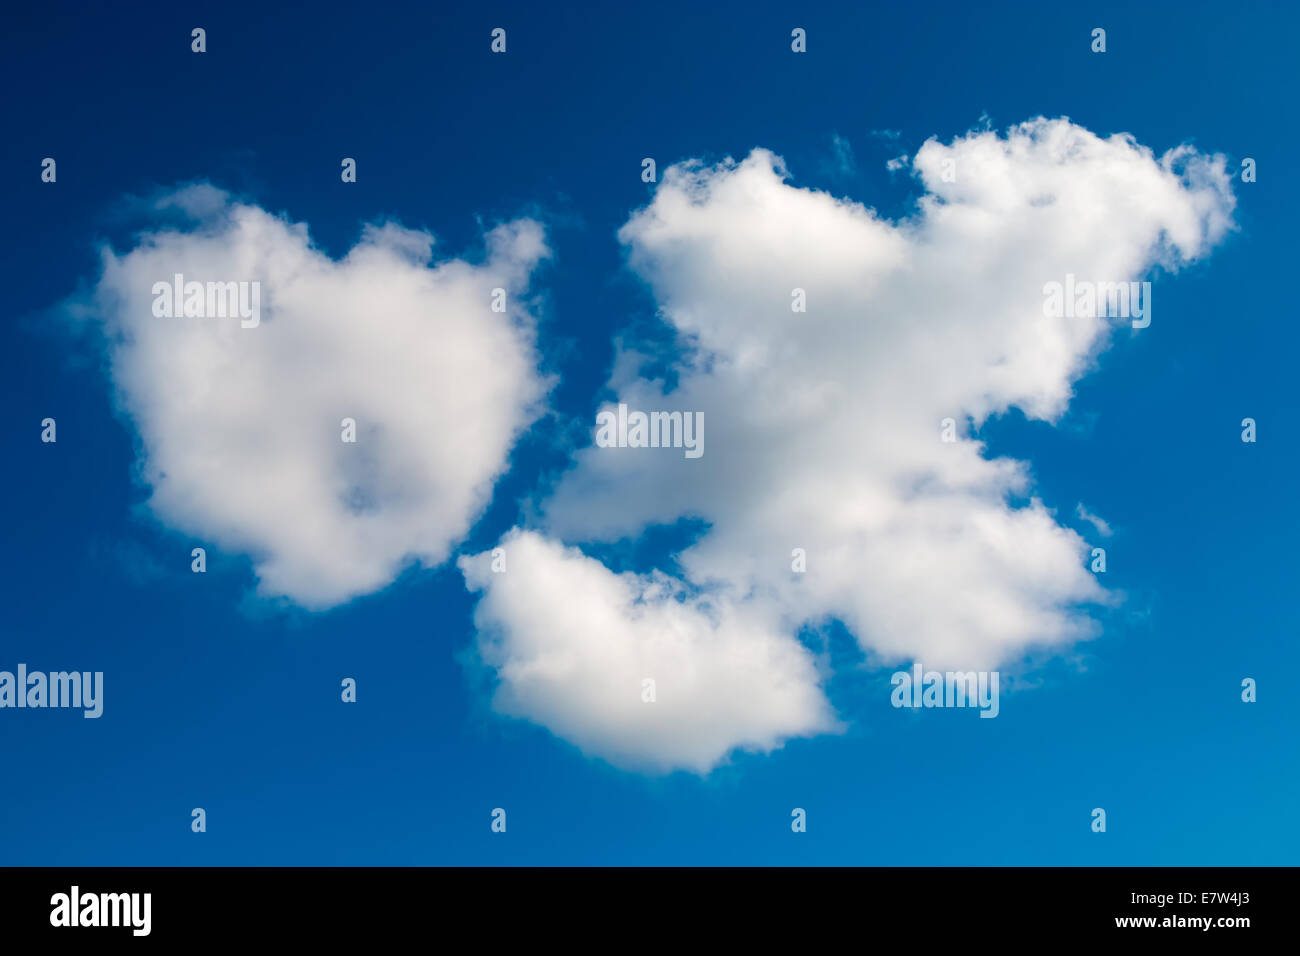 Puffy white clouds on blue sky Banque D'Images